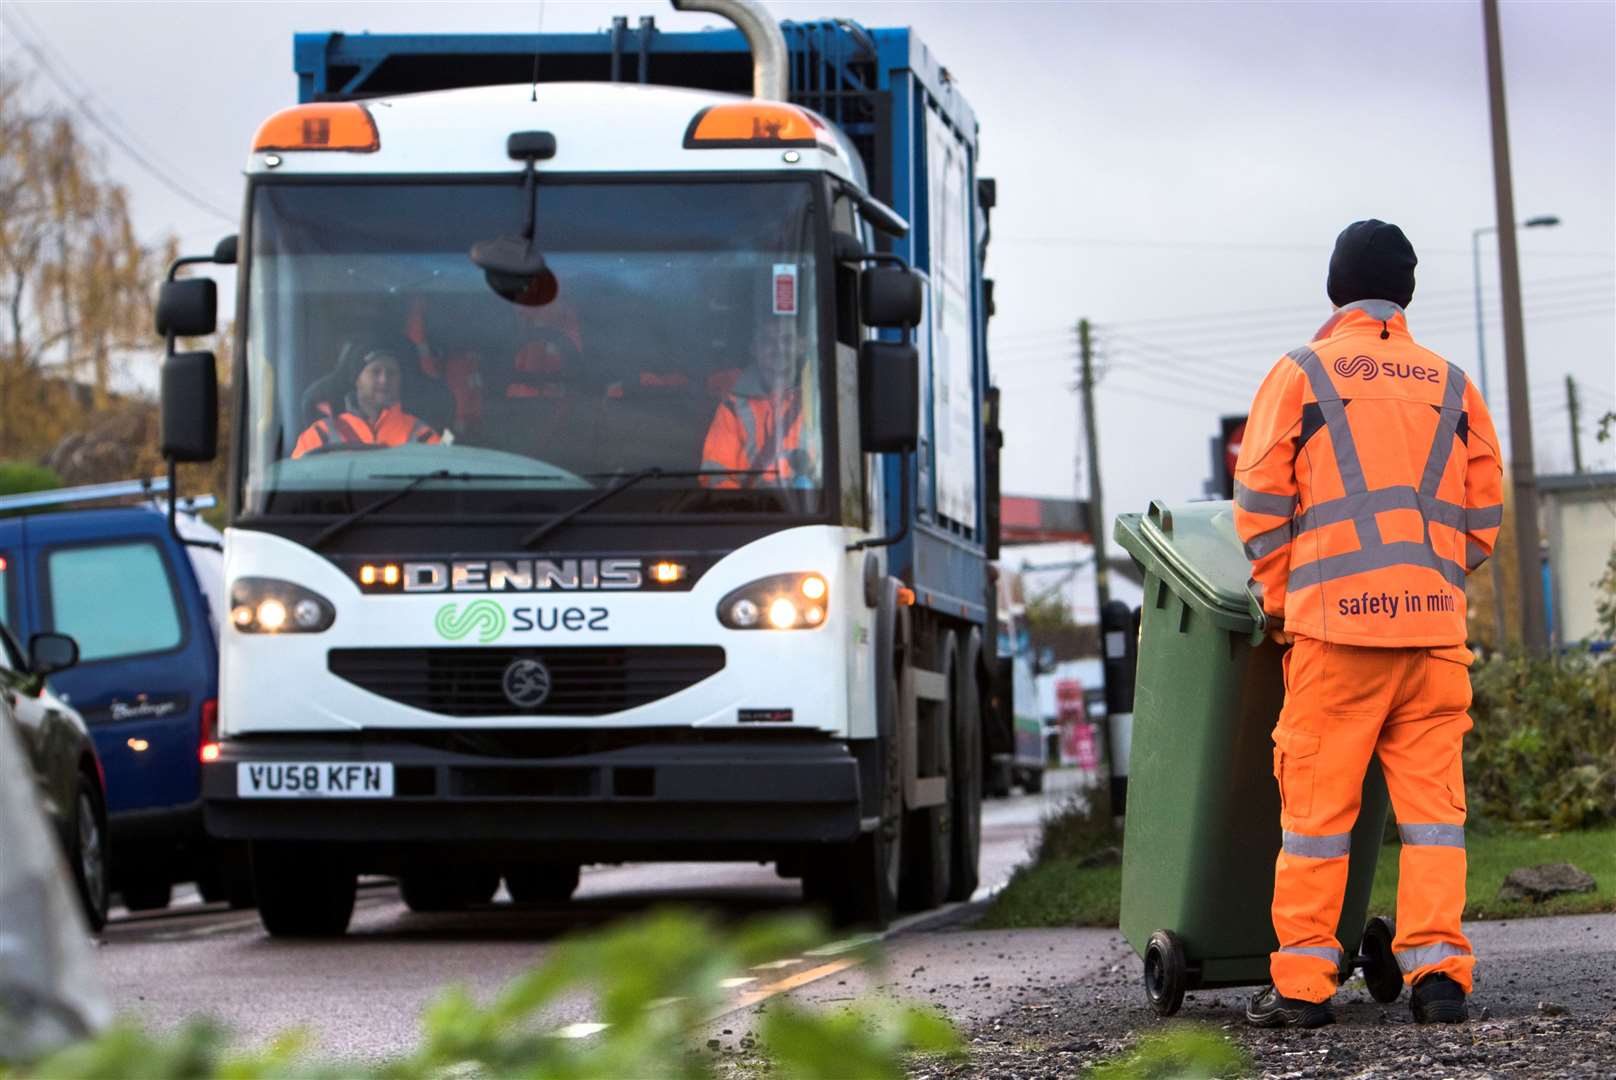 Suez has taken over the bin collections in Swale, Ashford and Maidstone